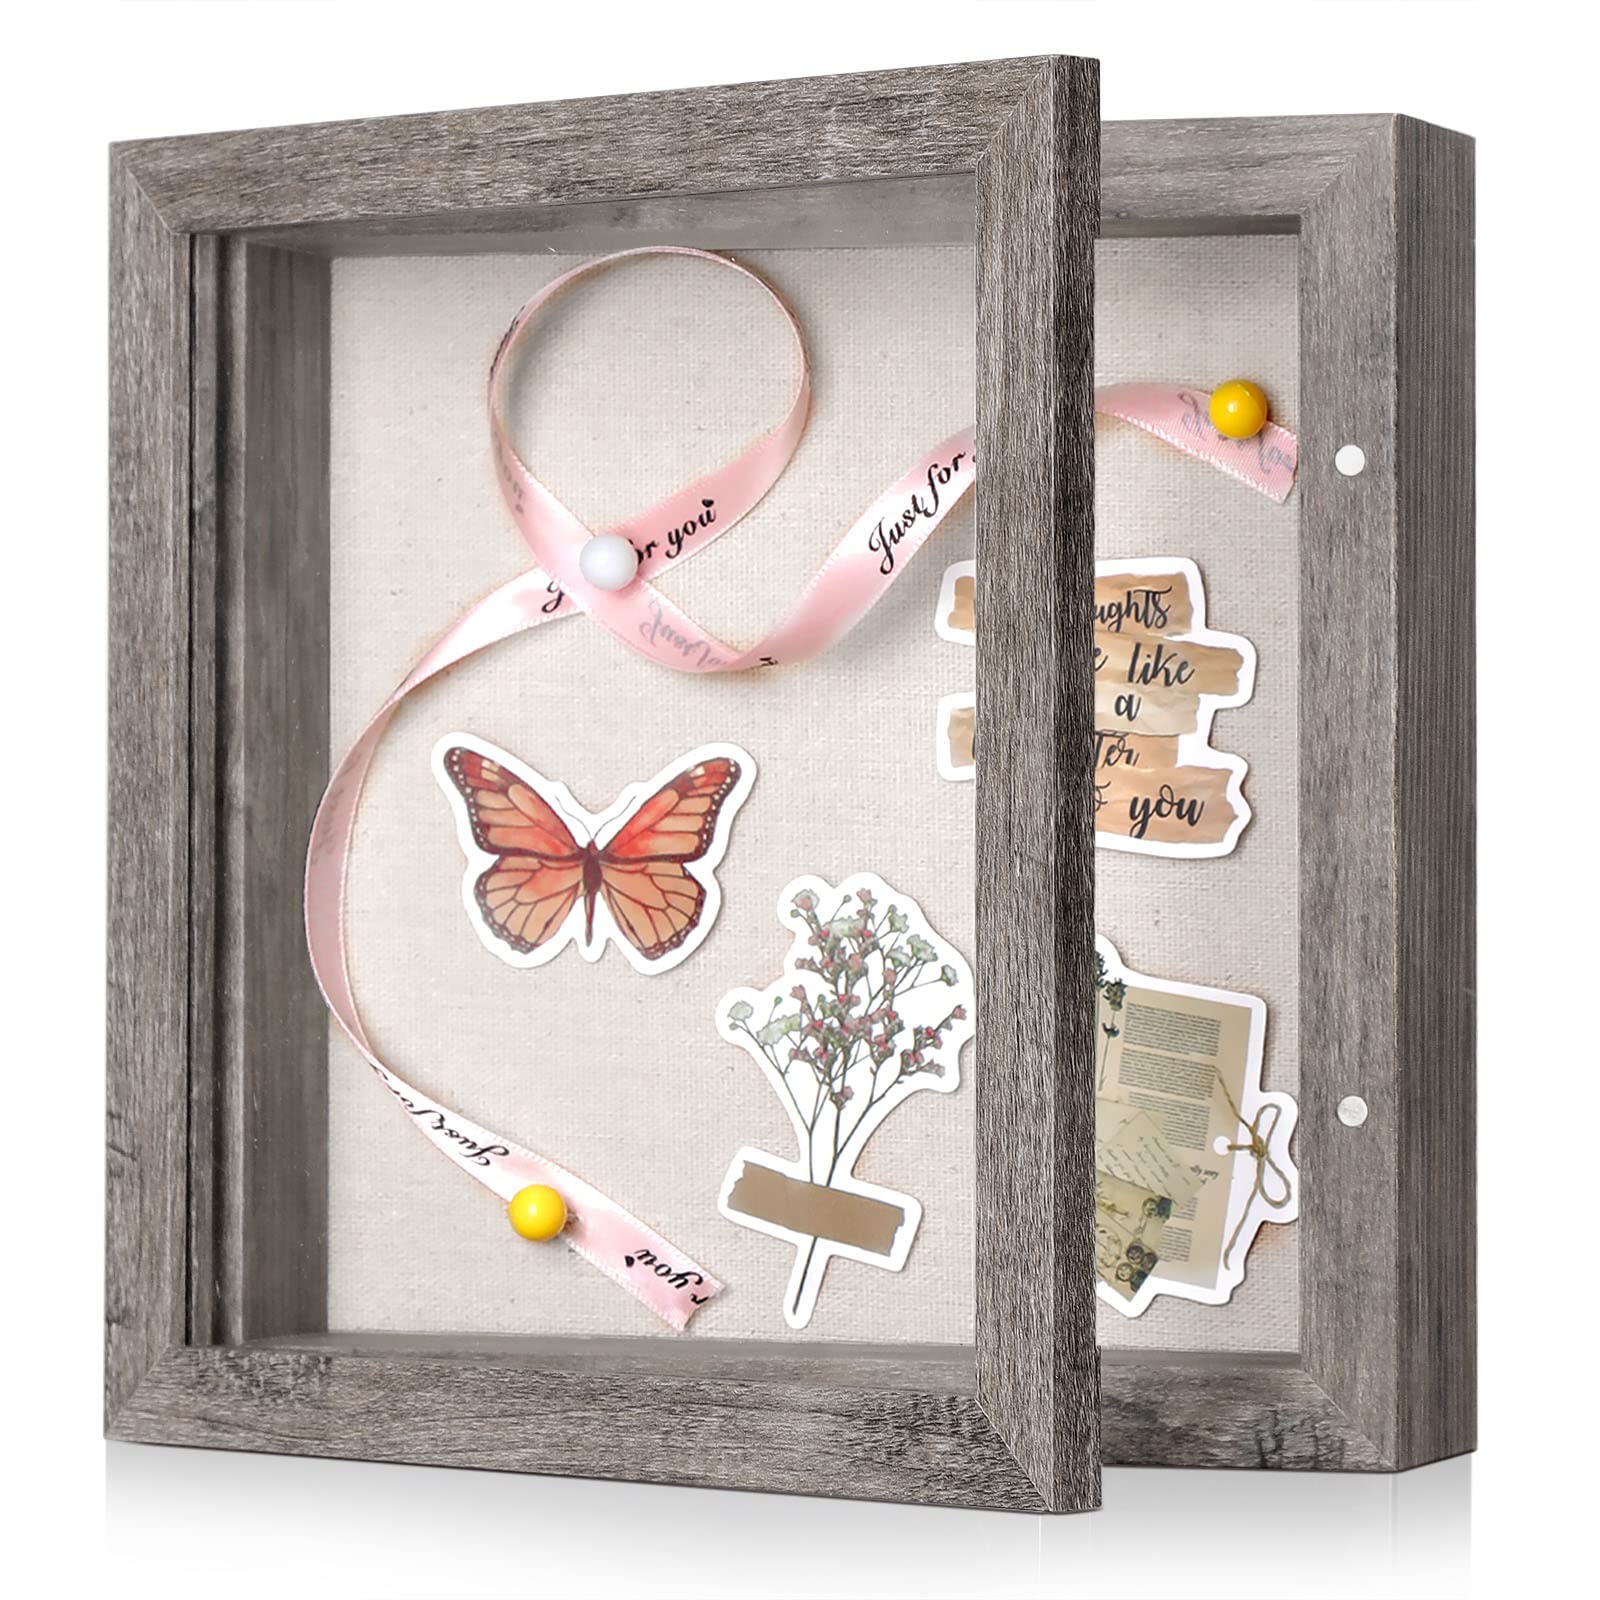 Califortree 8x8 Shadow Box Frame with Linen Back - Sturdy Rustic